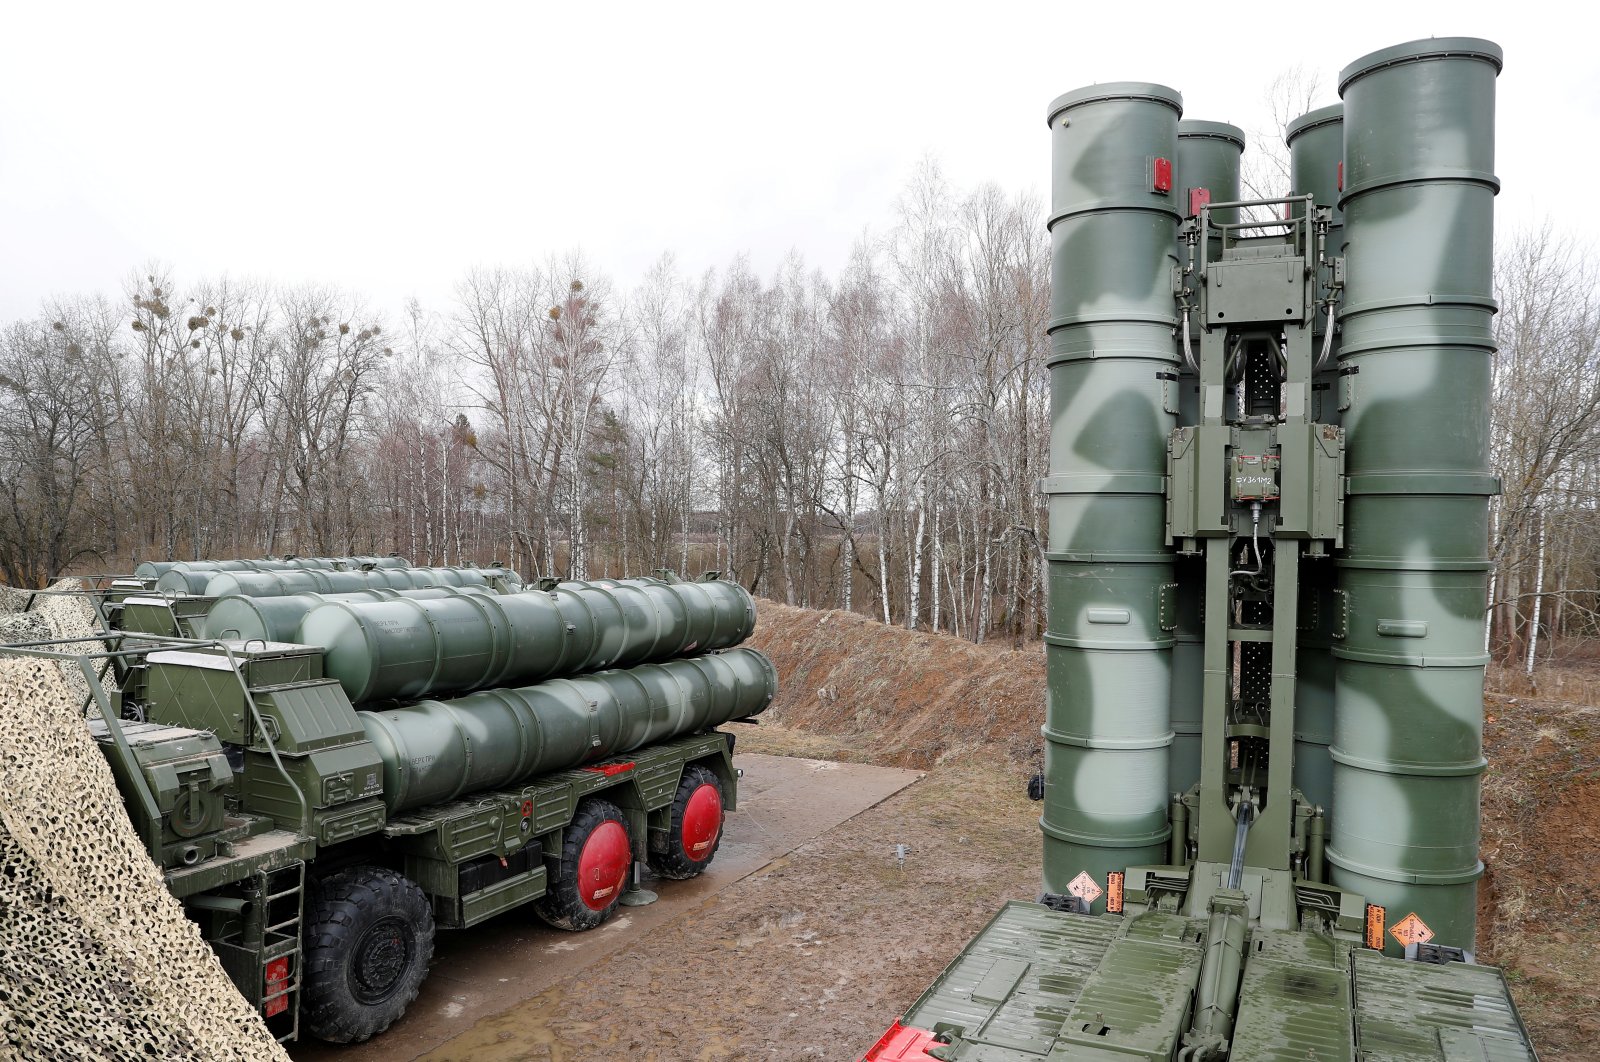 A view shows a new S-400 "Triumph" surface-to-air missile system after its deployment at a military base outside the town of Gvardeysk near Kaliningrad, Russia, March 11, 2019. (Reuters Photo)